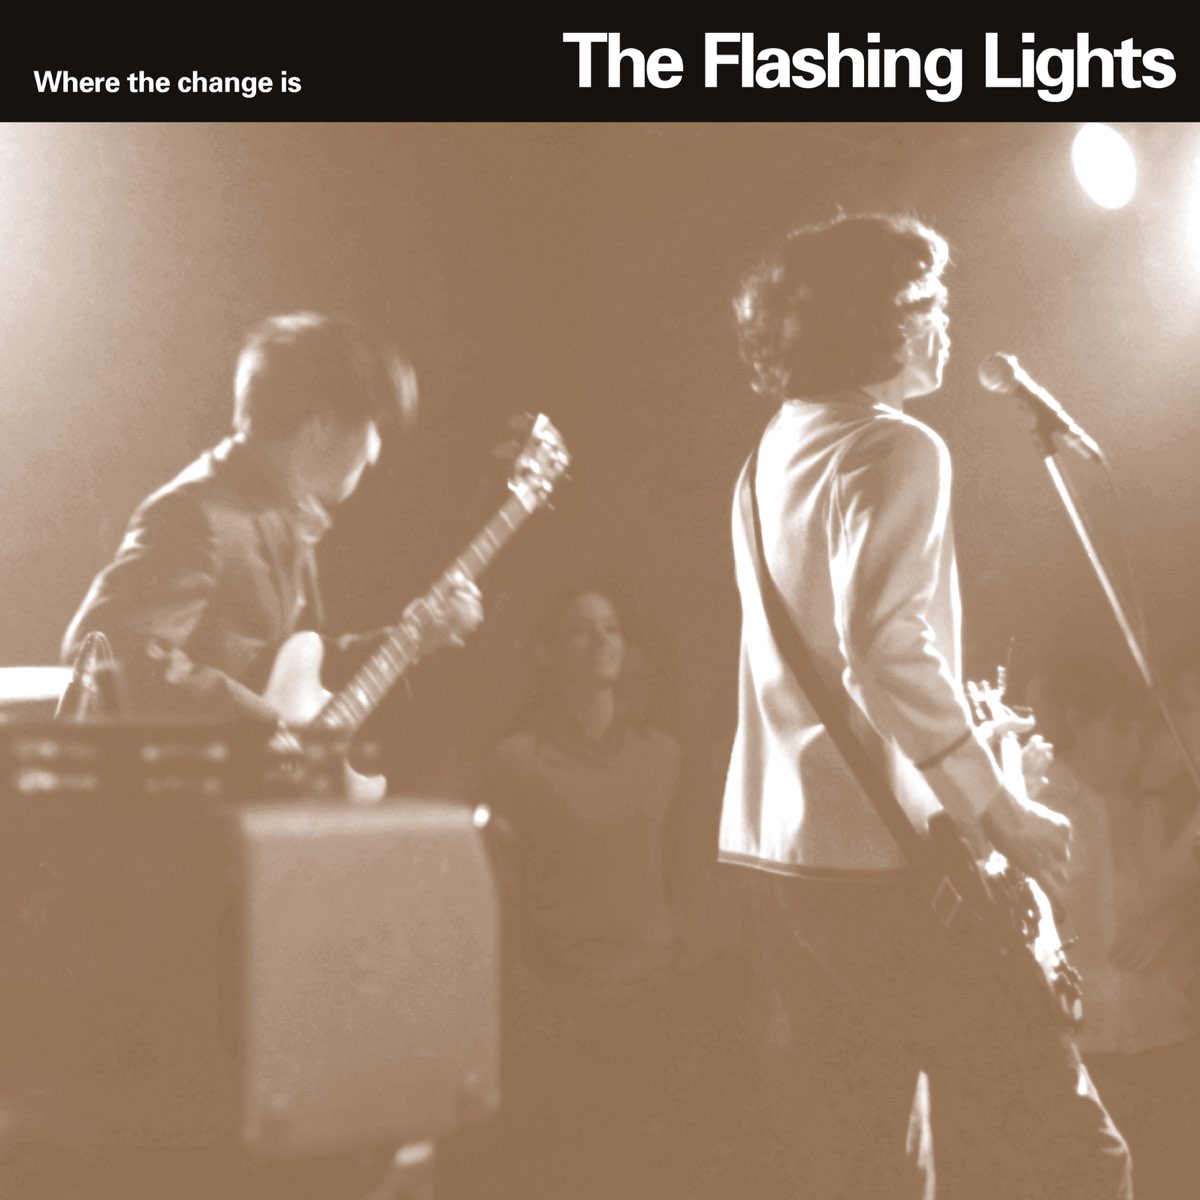 The Flashing Lights – Where The Change Is